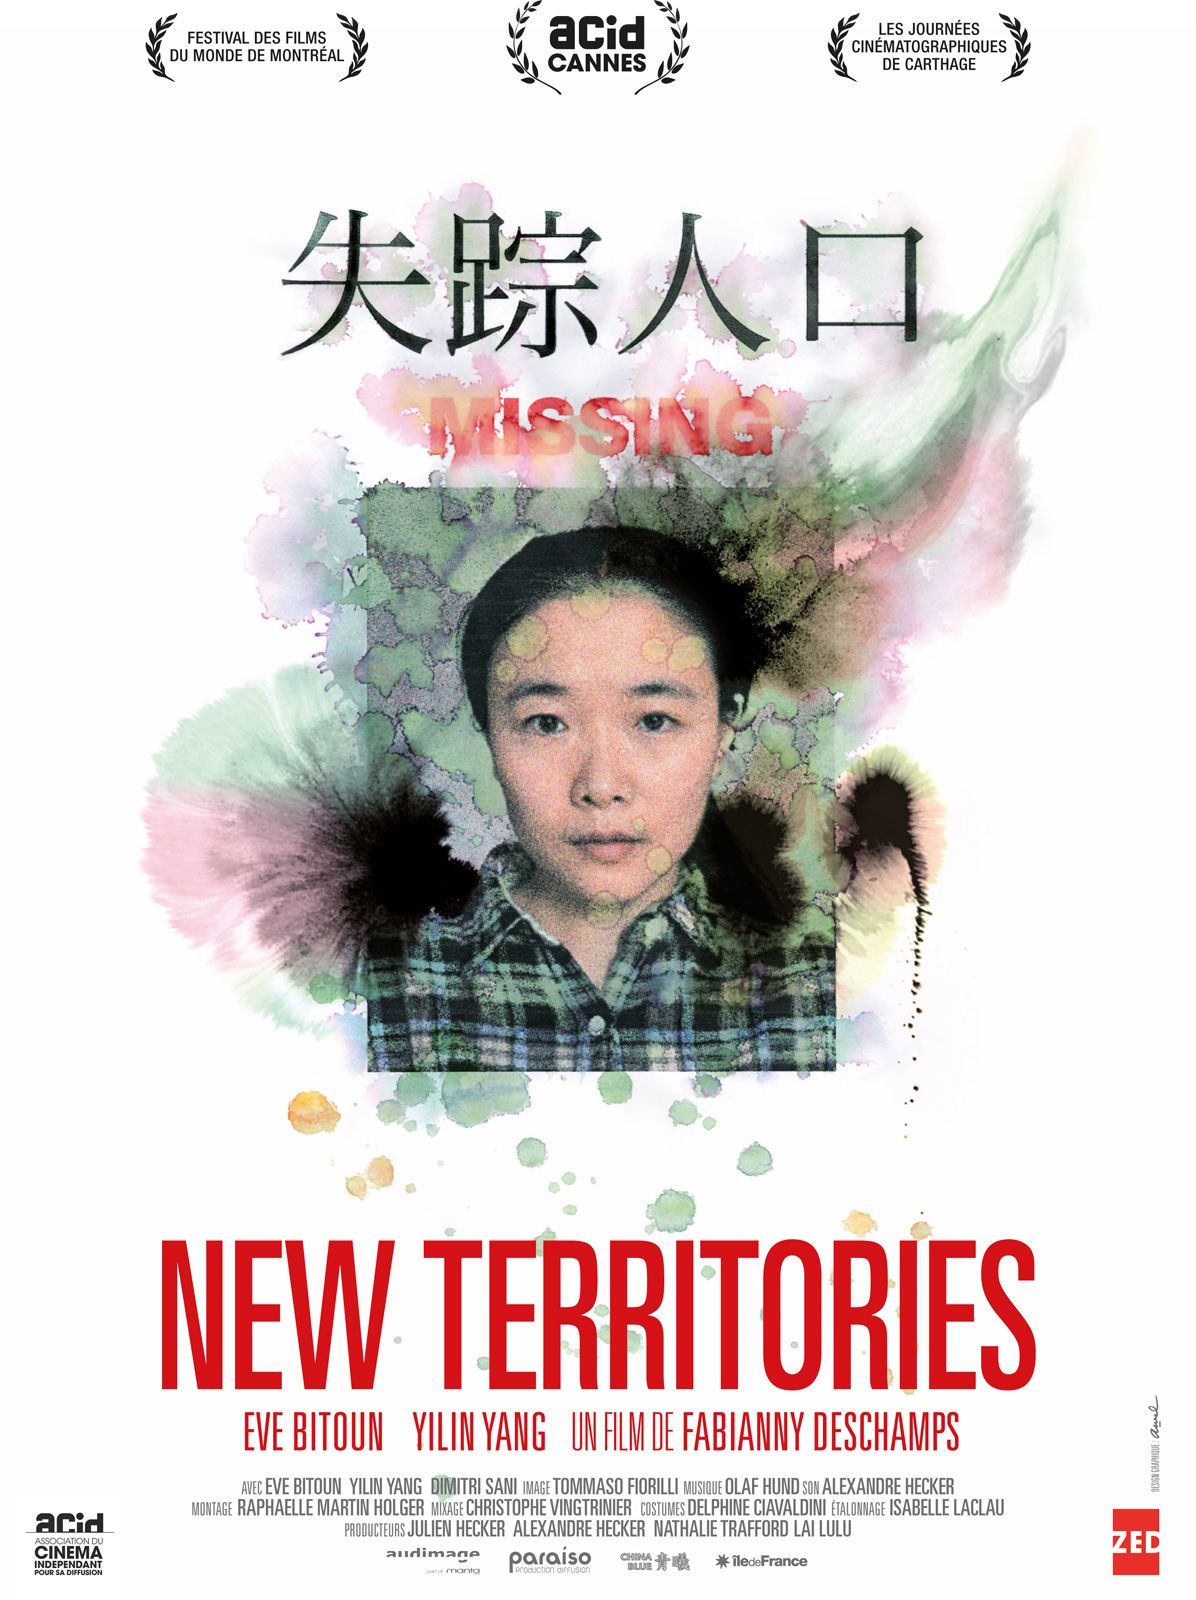 New Territories - Film (2015) streaming VF gratuit complet